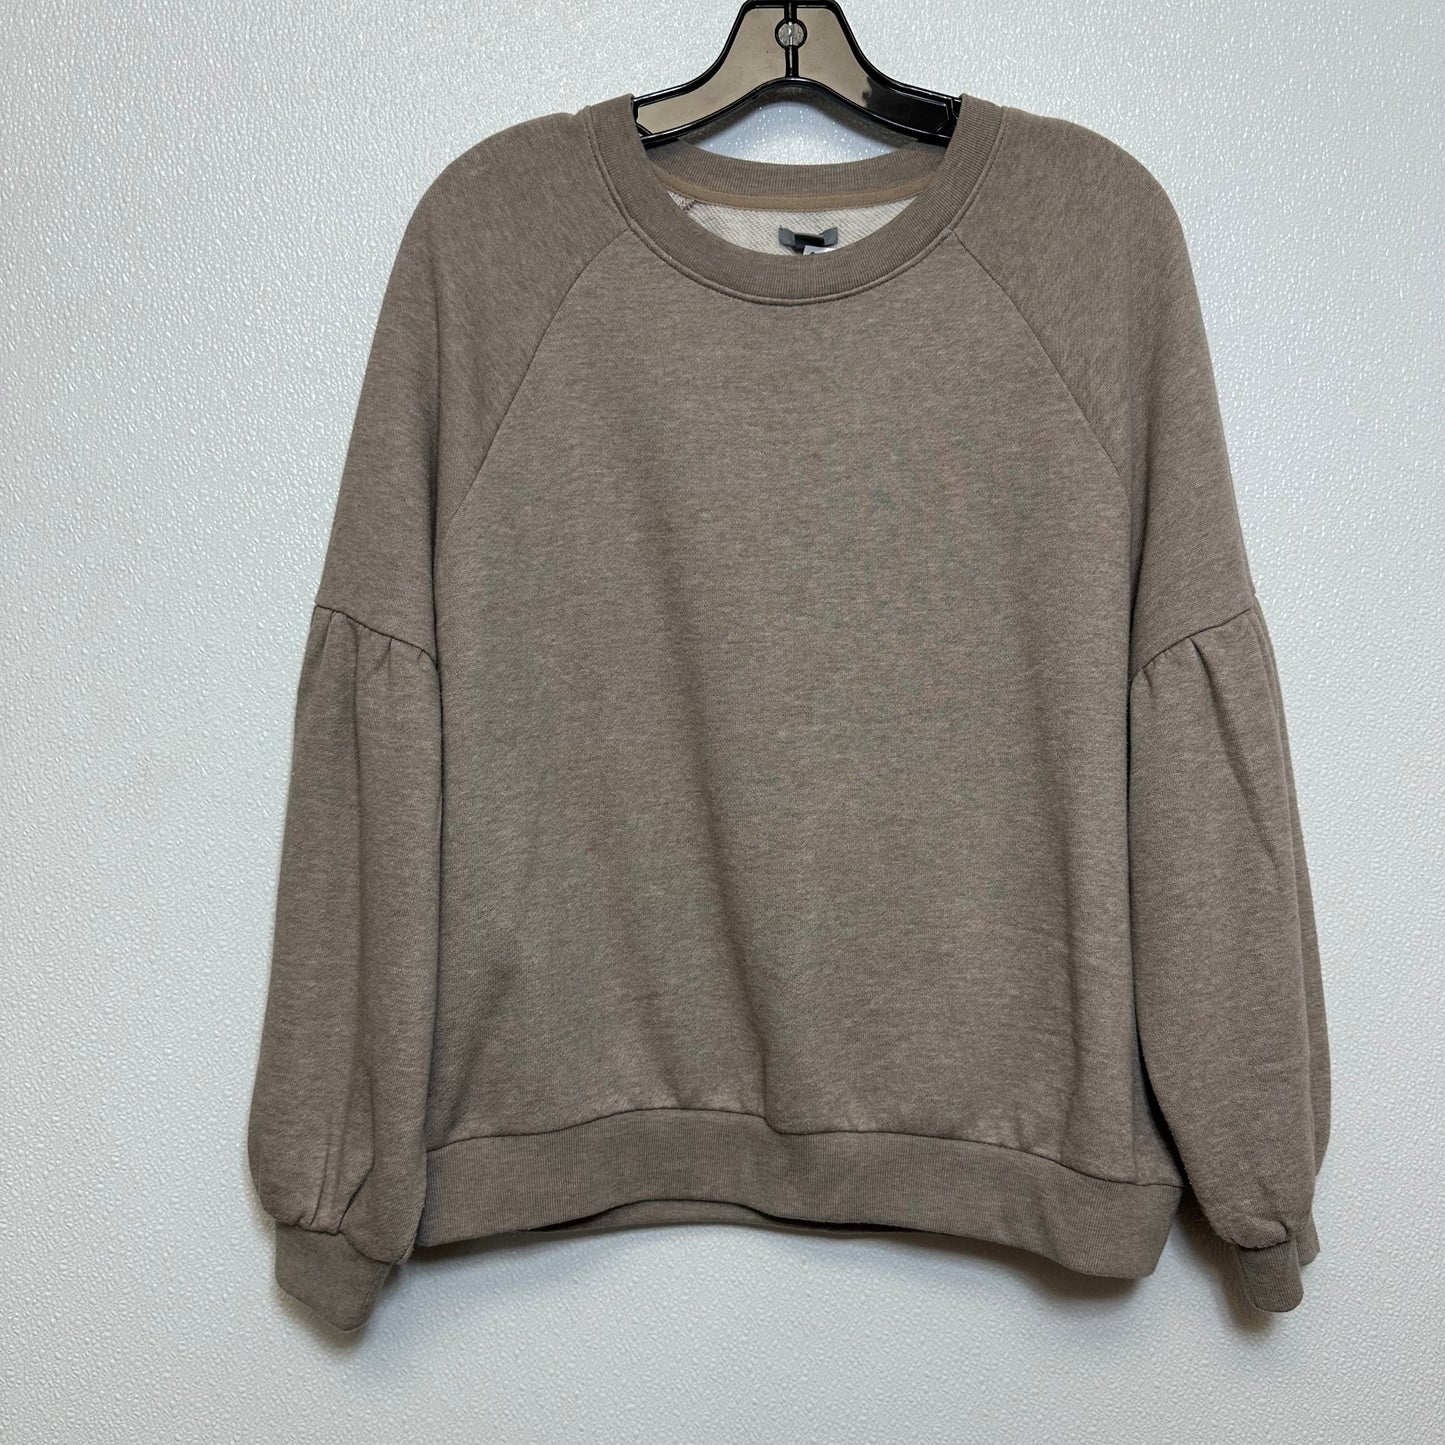 Sweater By Aerie  Size: M